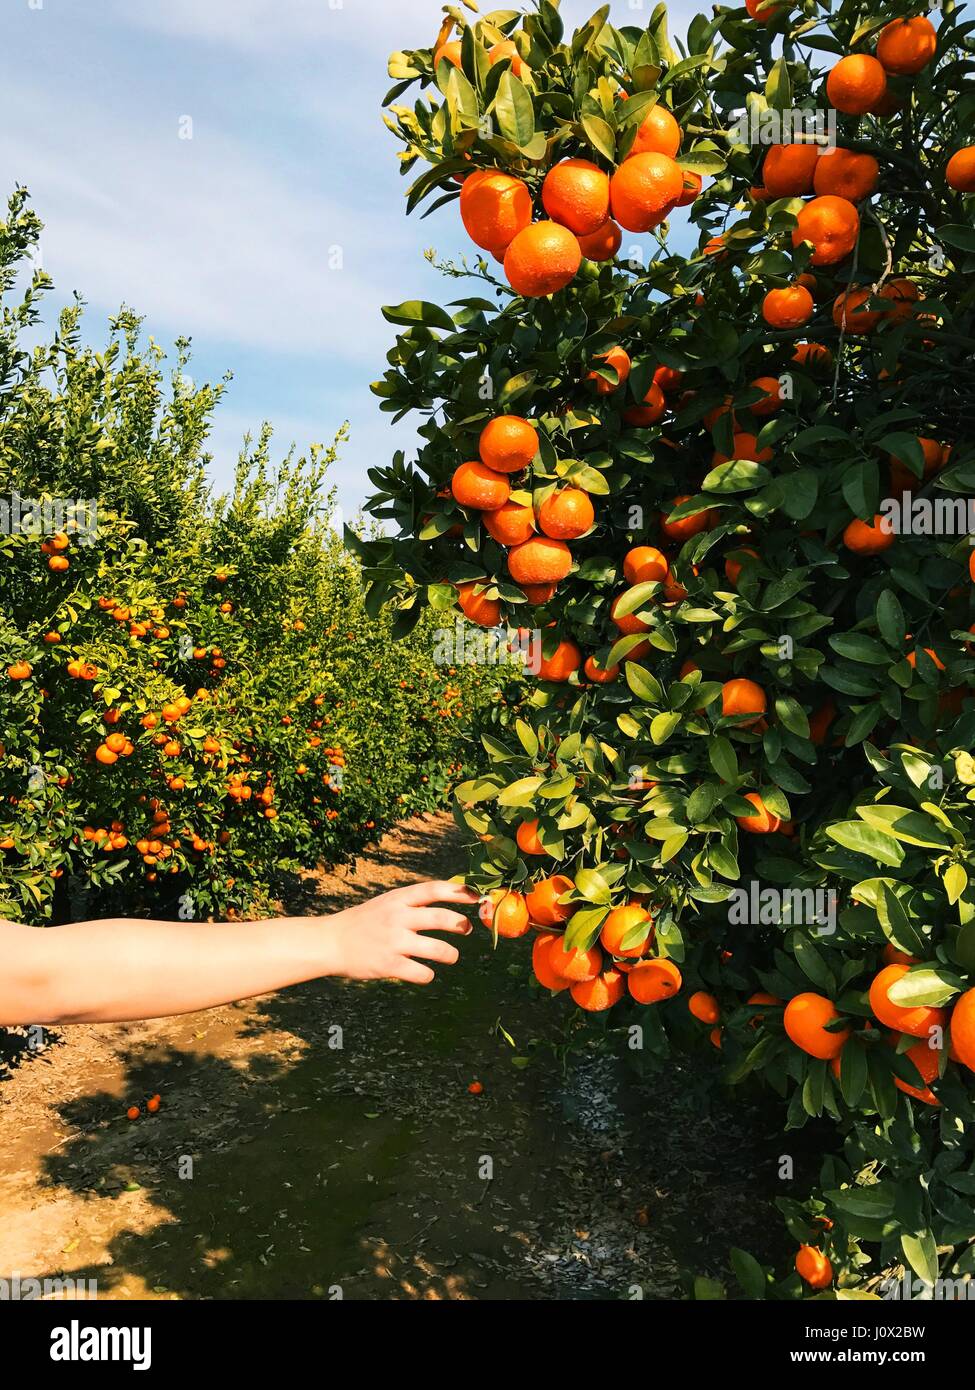 Boy's hand picking an orange from a tree, California, United States Stock Photo